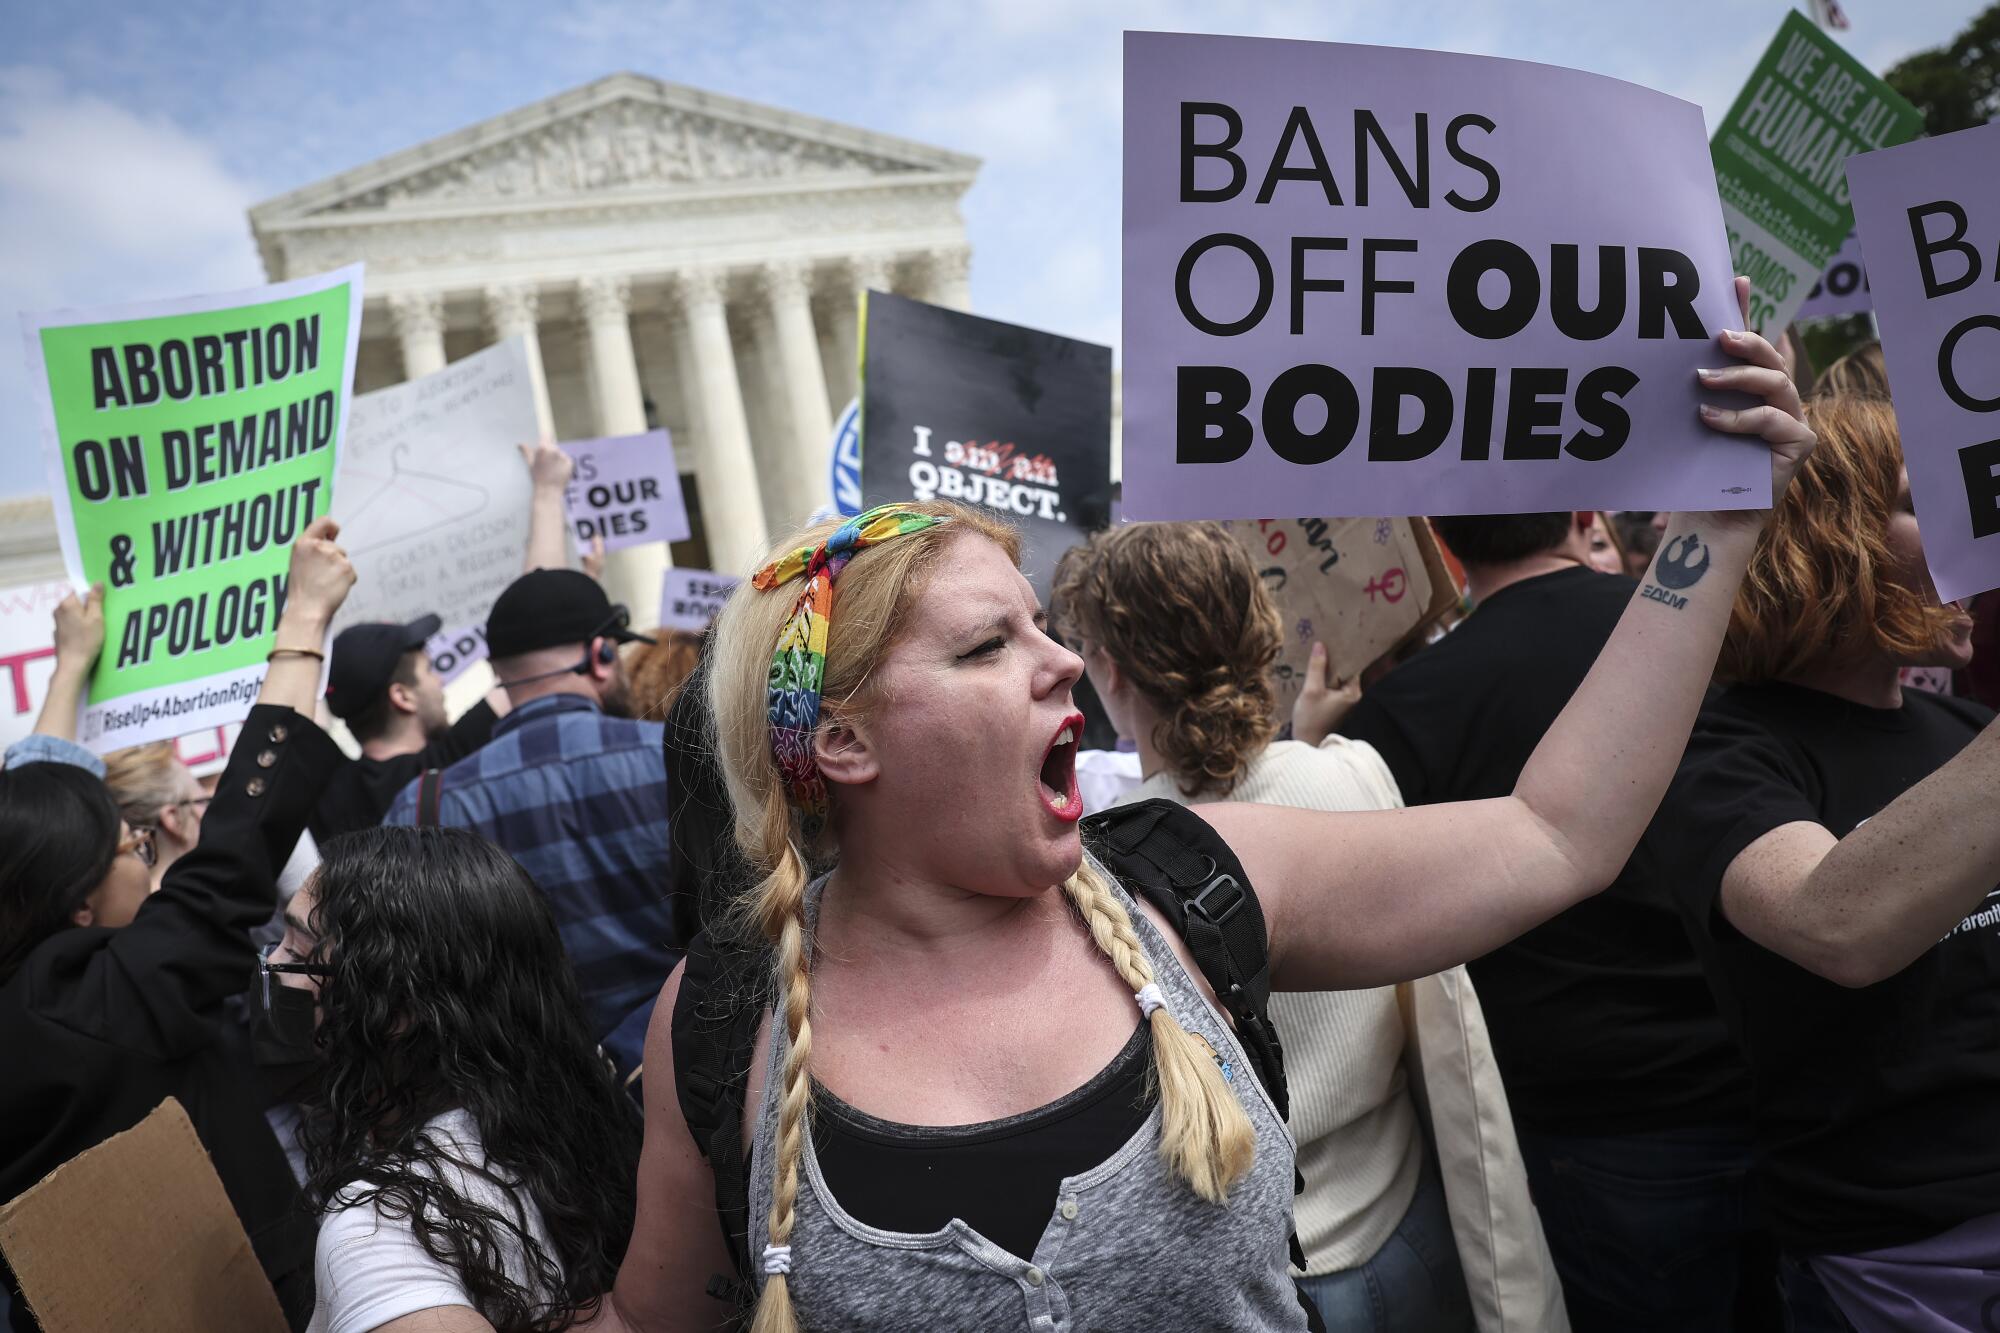 A young woman holds a sign reading, "Bans off our bodies."